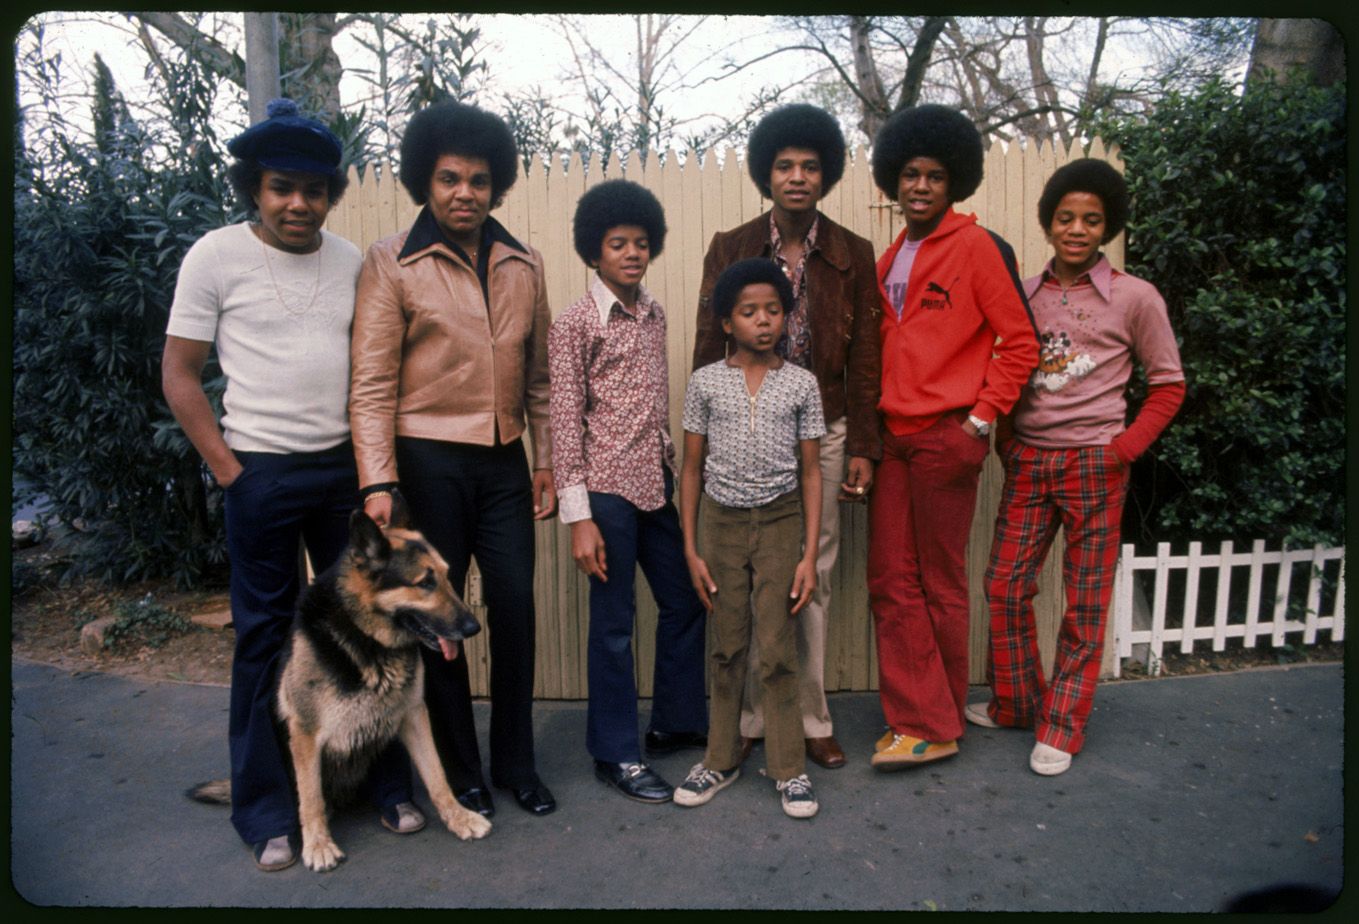 Michael Jackson Inside His Early Years in Gary, Indiana With His Musical Family